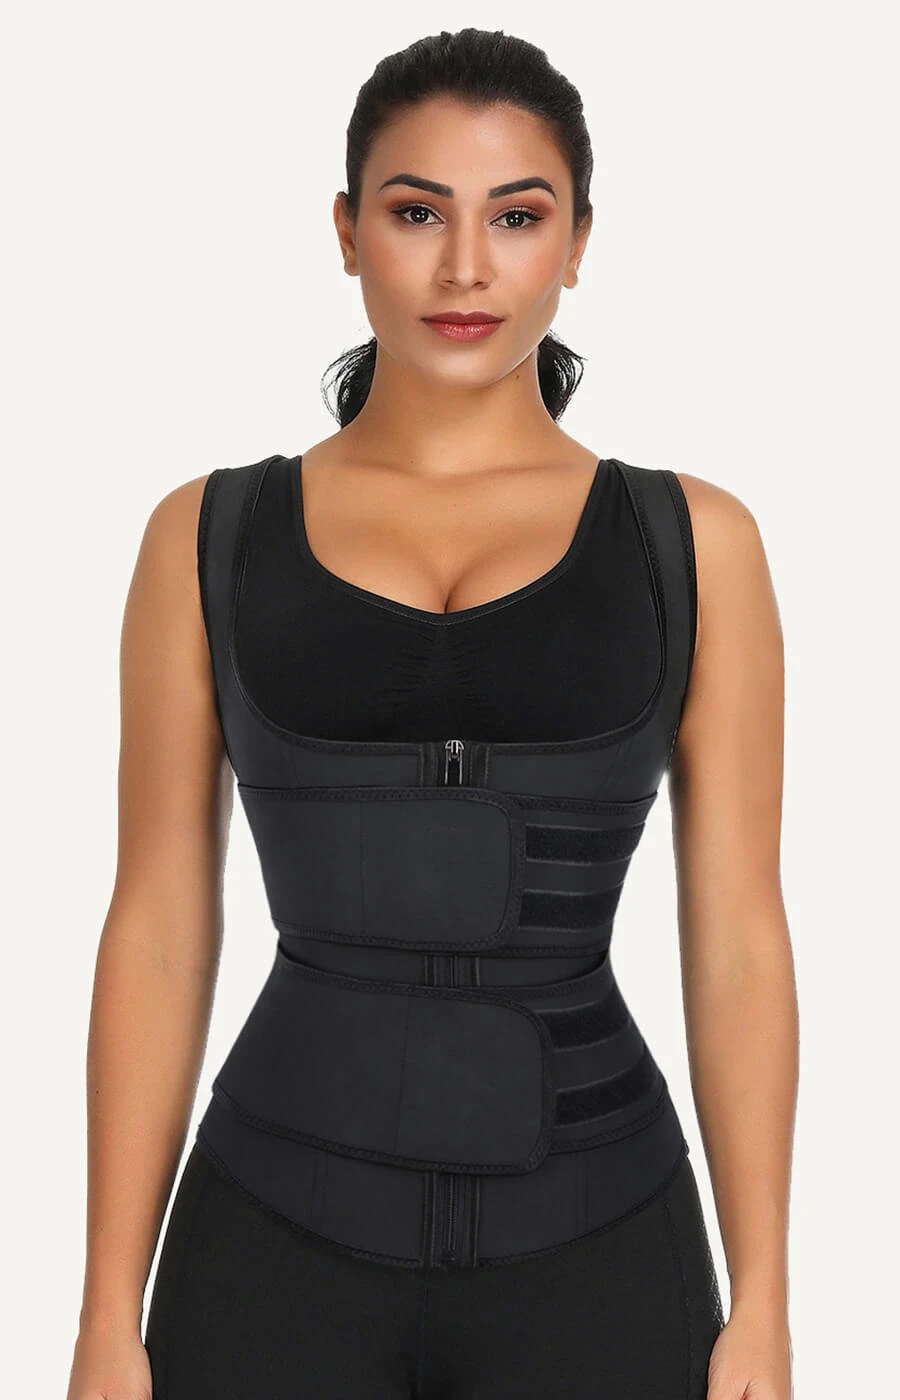 Waist and Thigh Trainer – An Easy Way to Tighten Your Waist and Flatten Your Butt